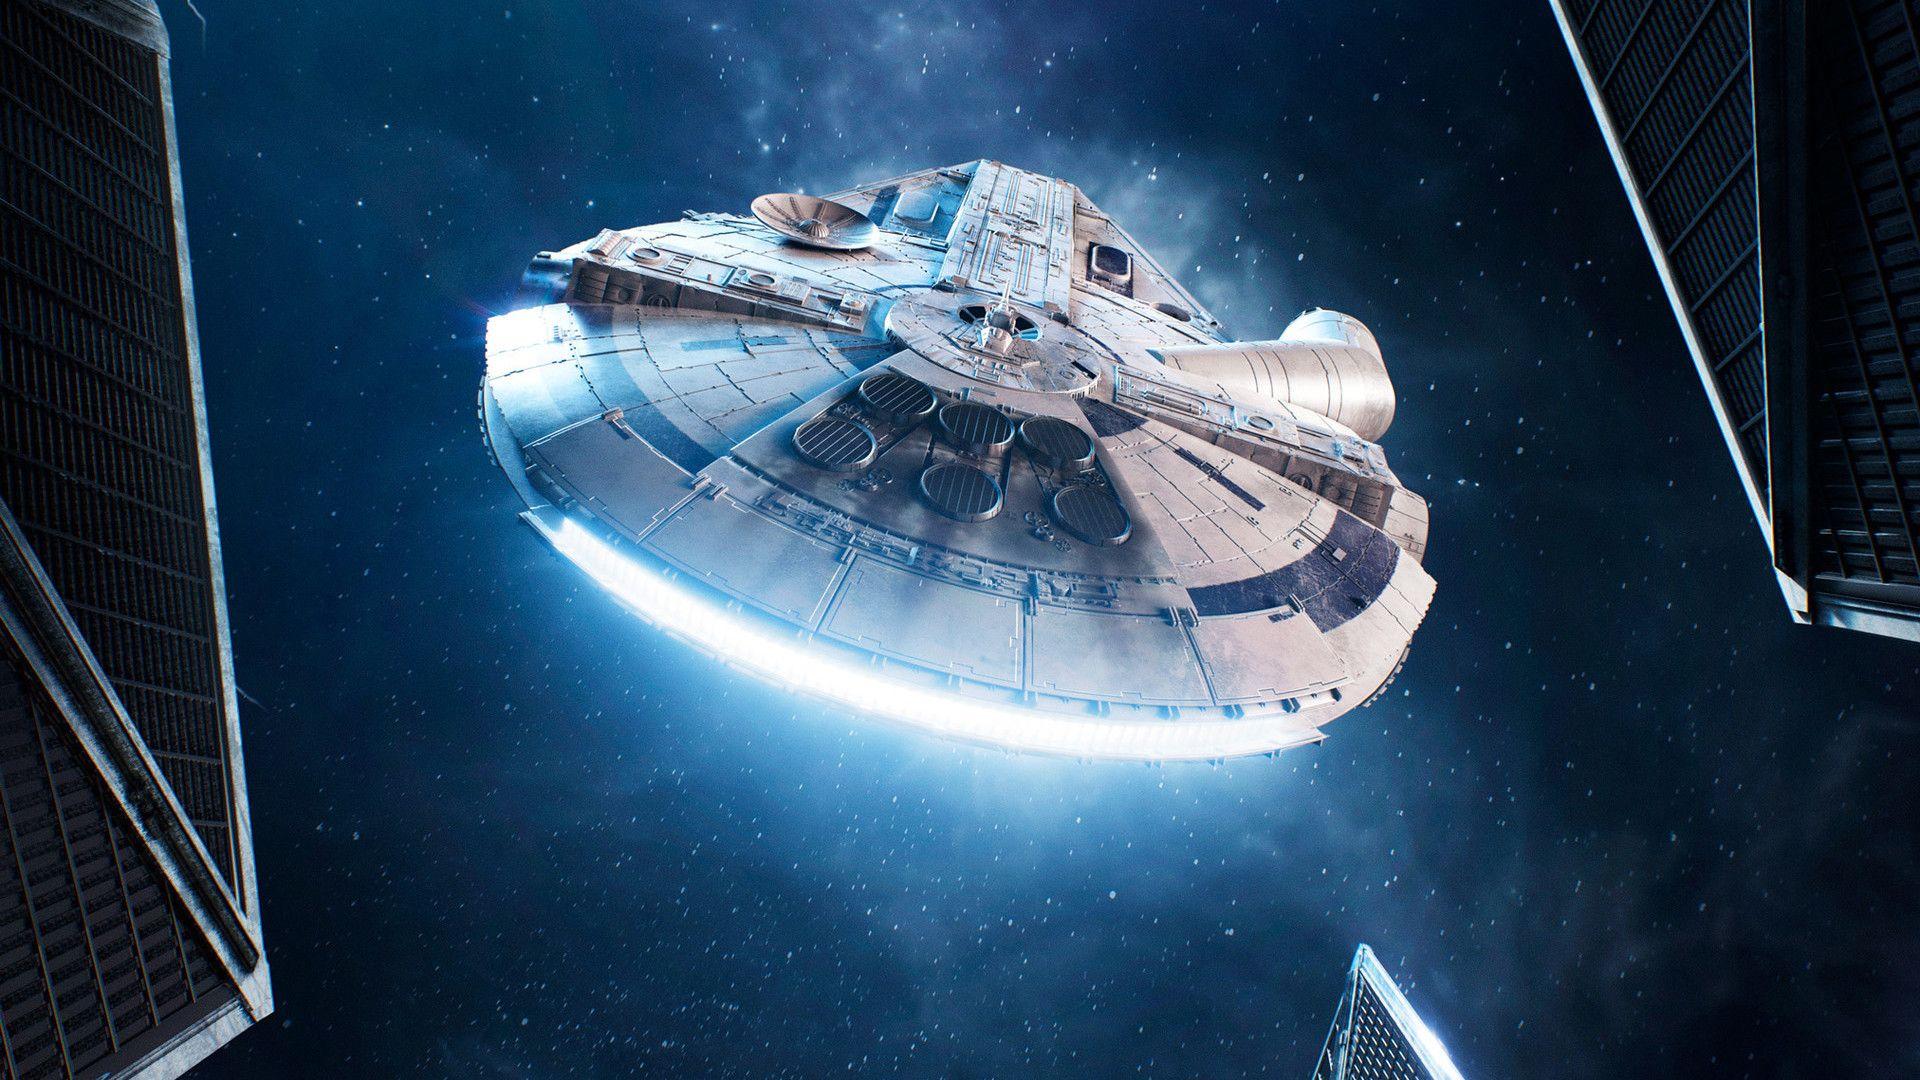 Download Fly through the galaxy in the iconic Millennium Falcon Wallpaper   Wallpaperscom